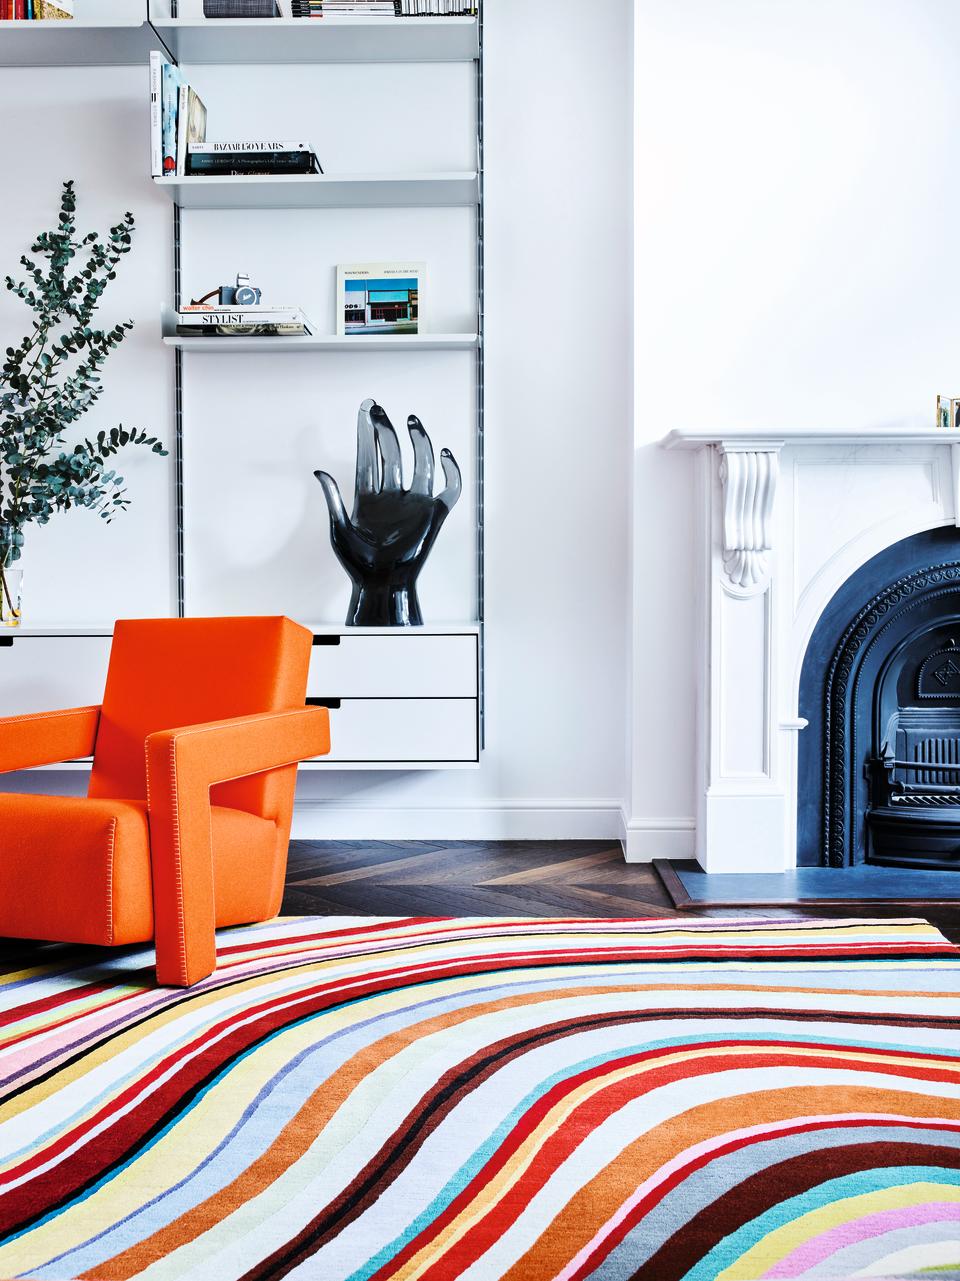 A living room with bright white walls, an orange armchair and multicolored rug